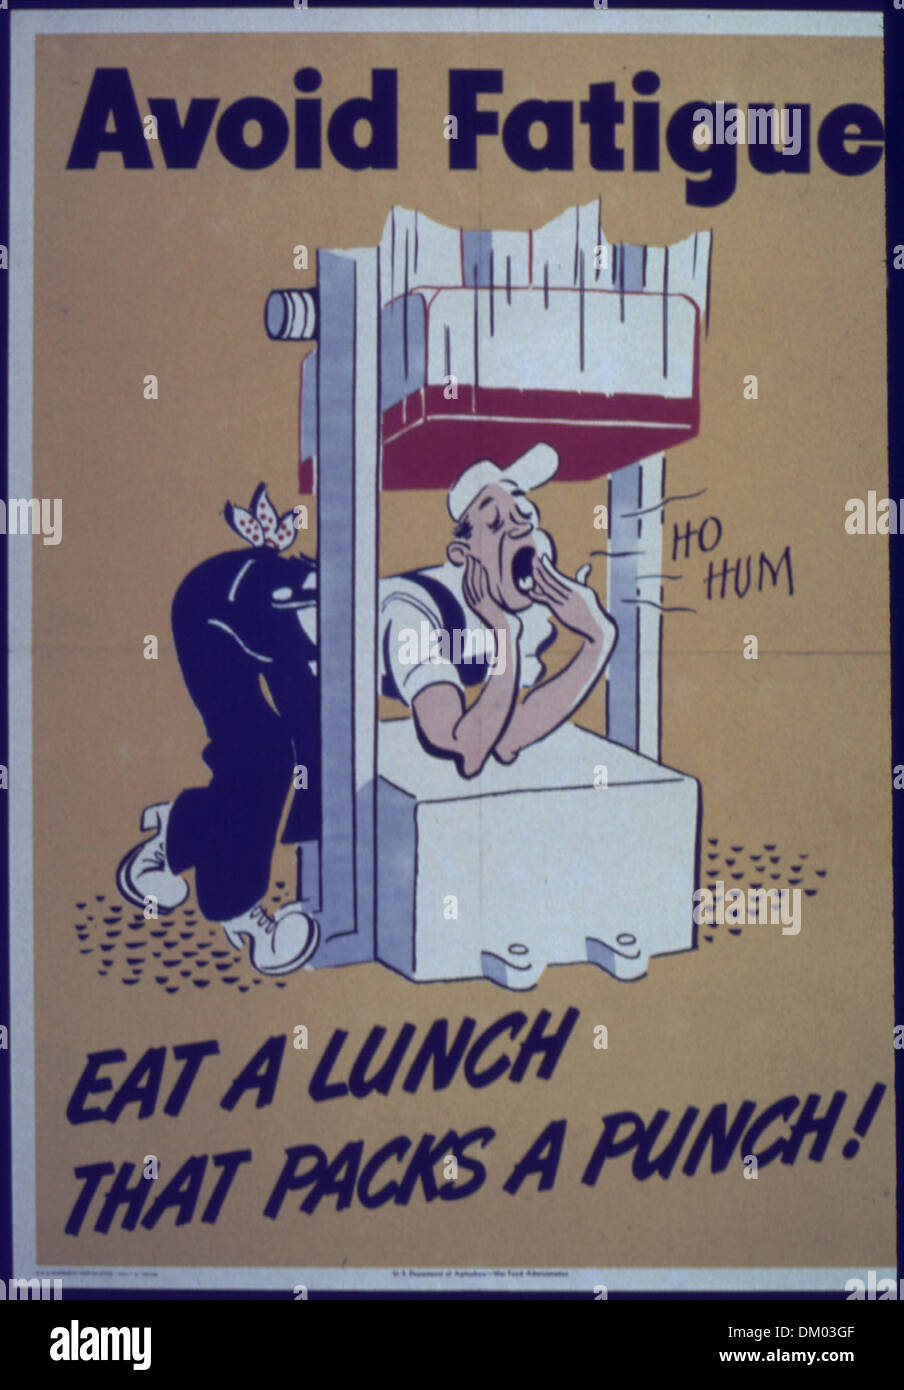 'Avoid fatigue - Eat a lunch that packs a punch' 513896 Stock Photo